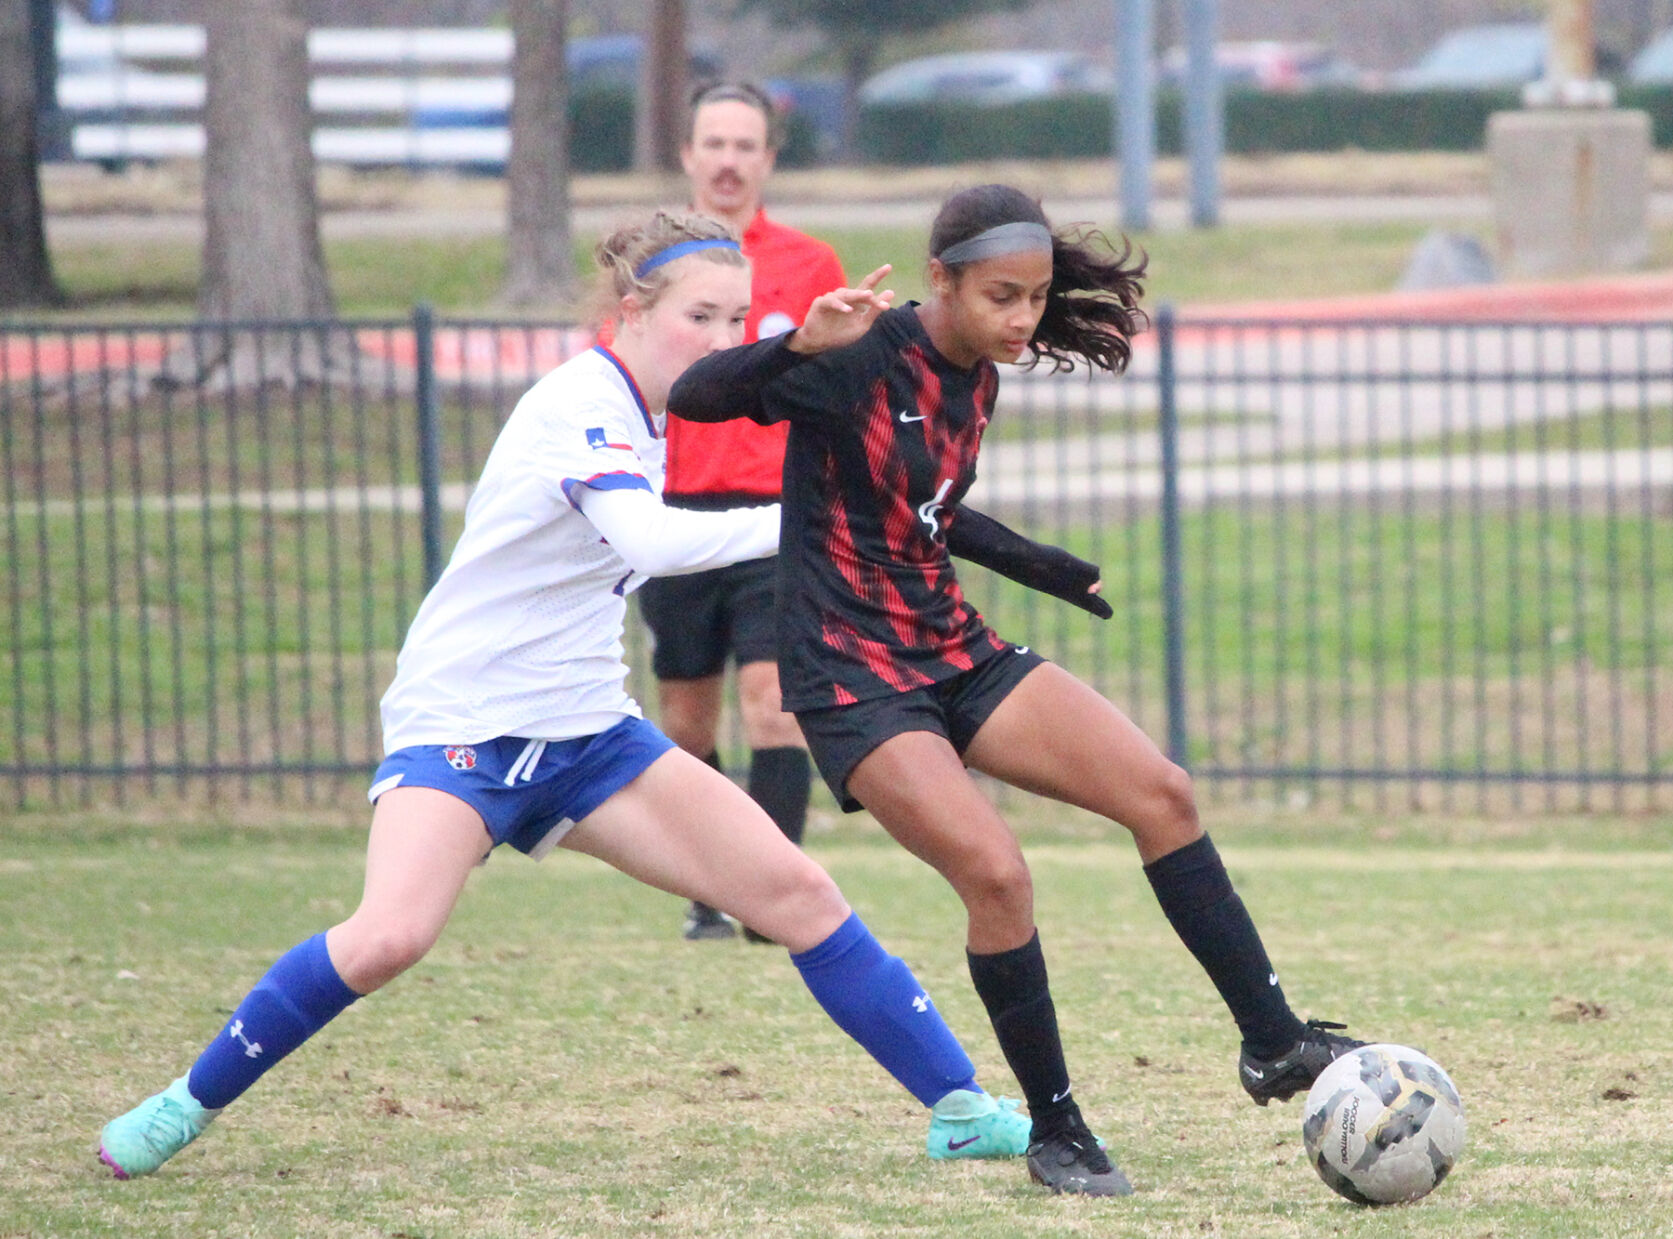 Denton County Soccer Teams Set for Exciting Playoff Kickoff on Monday